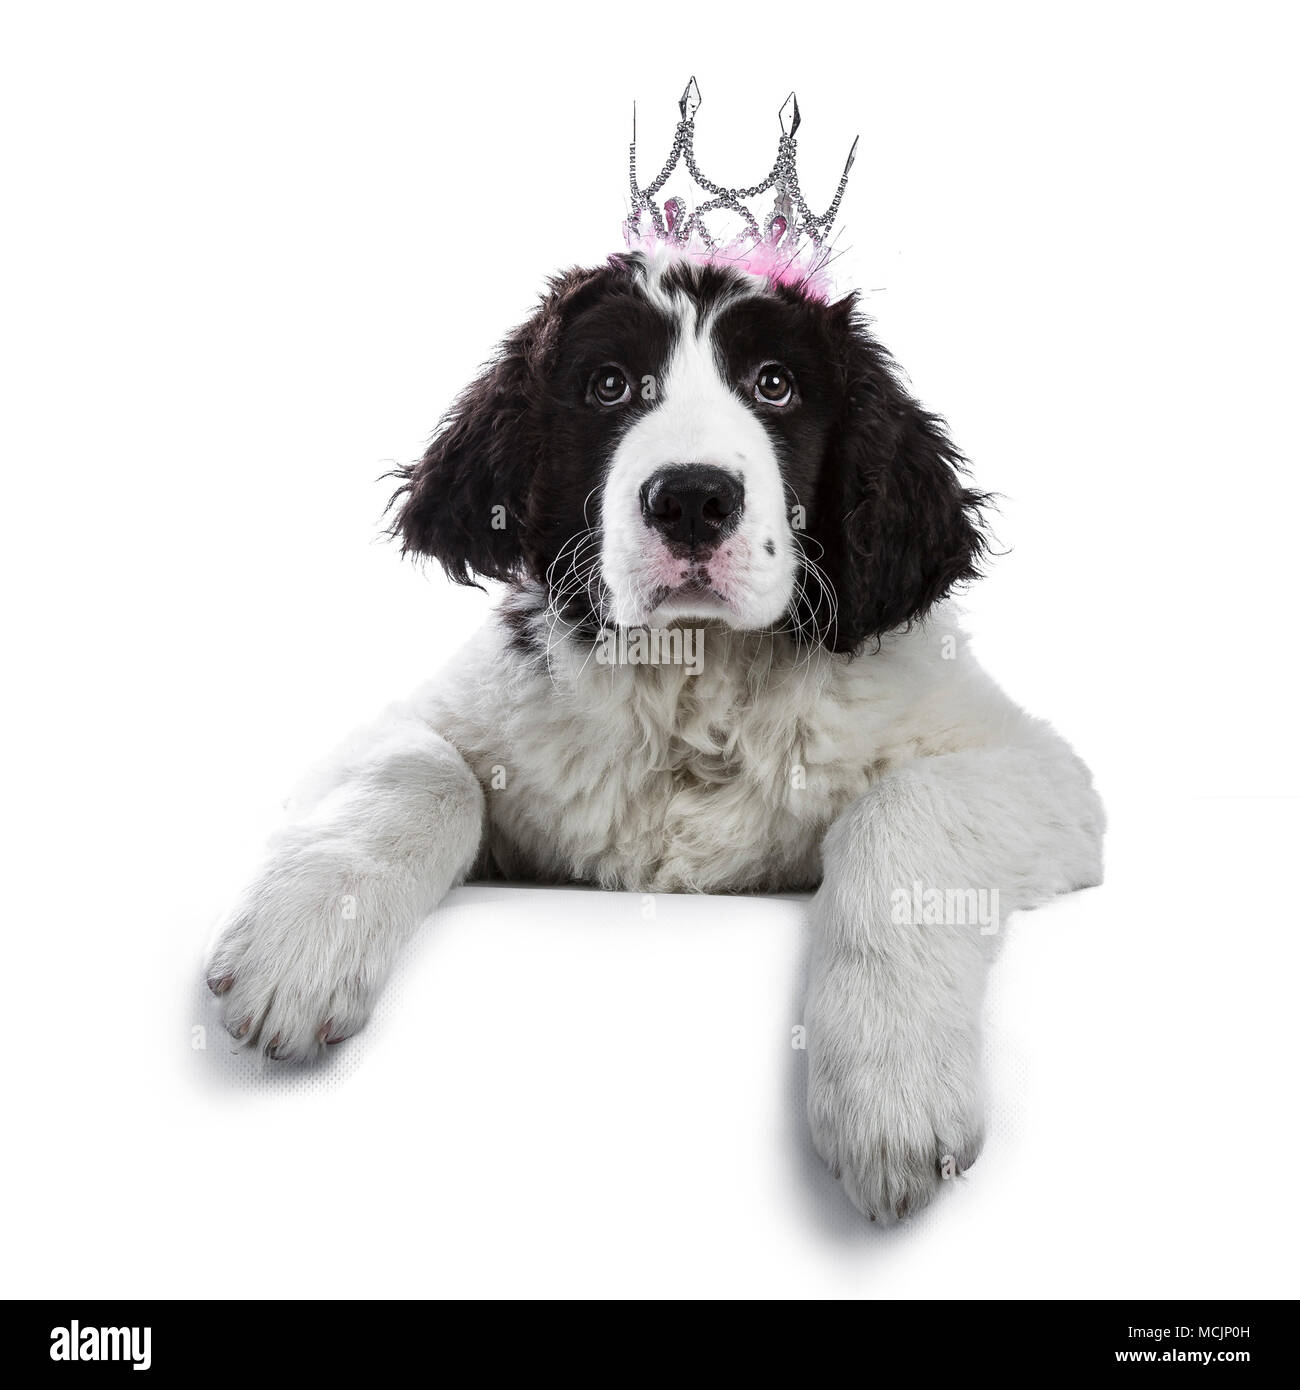 Black and white Landseer puppy dog laying down and wearing a crown while looking in the camera isolated on white background Stock Photo